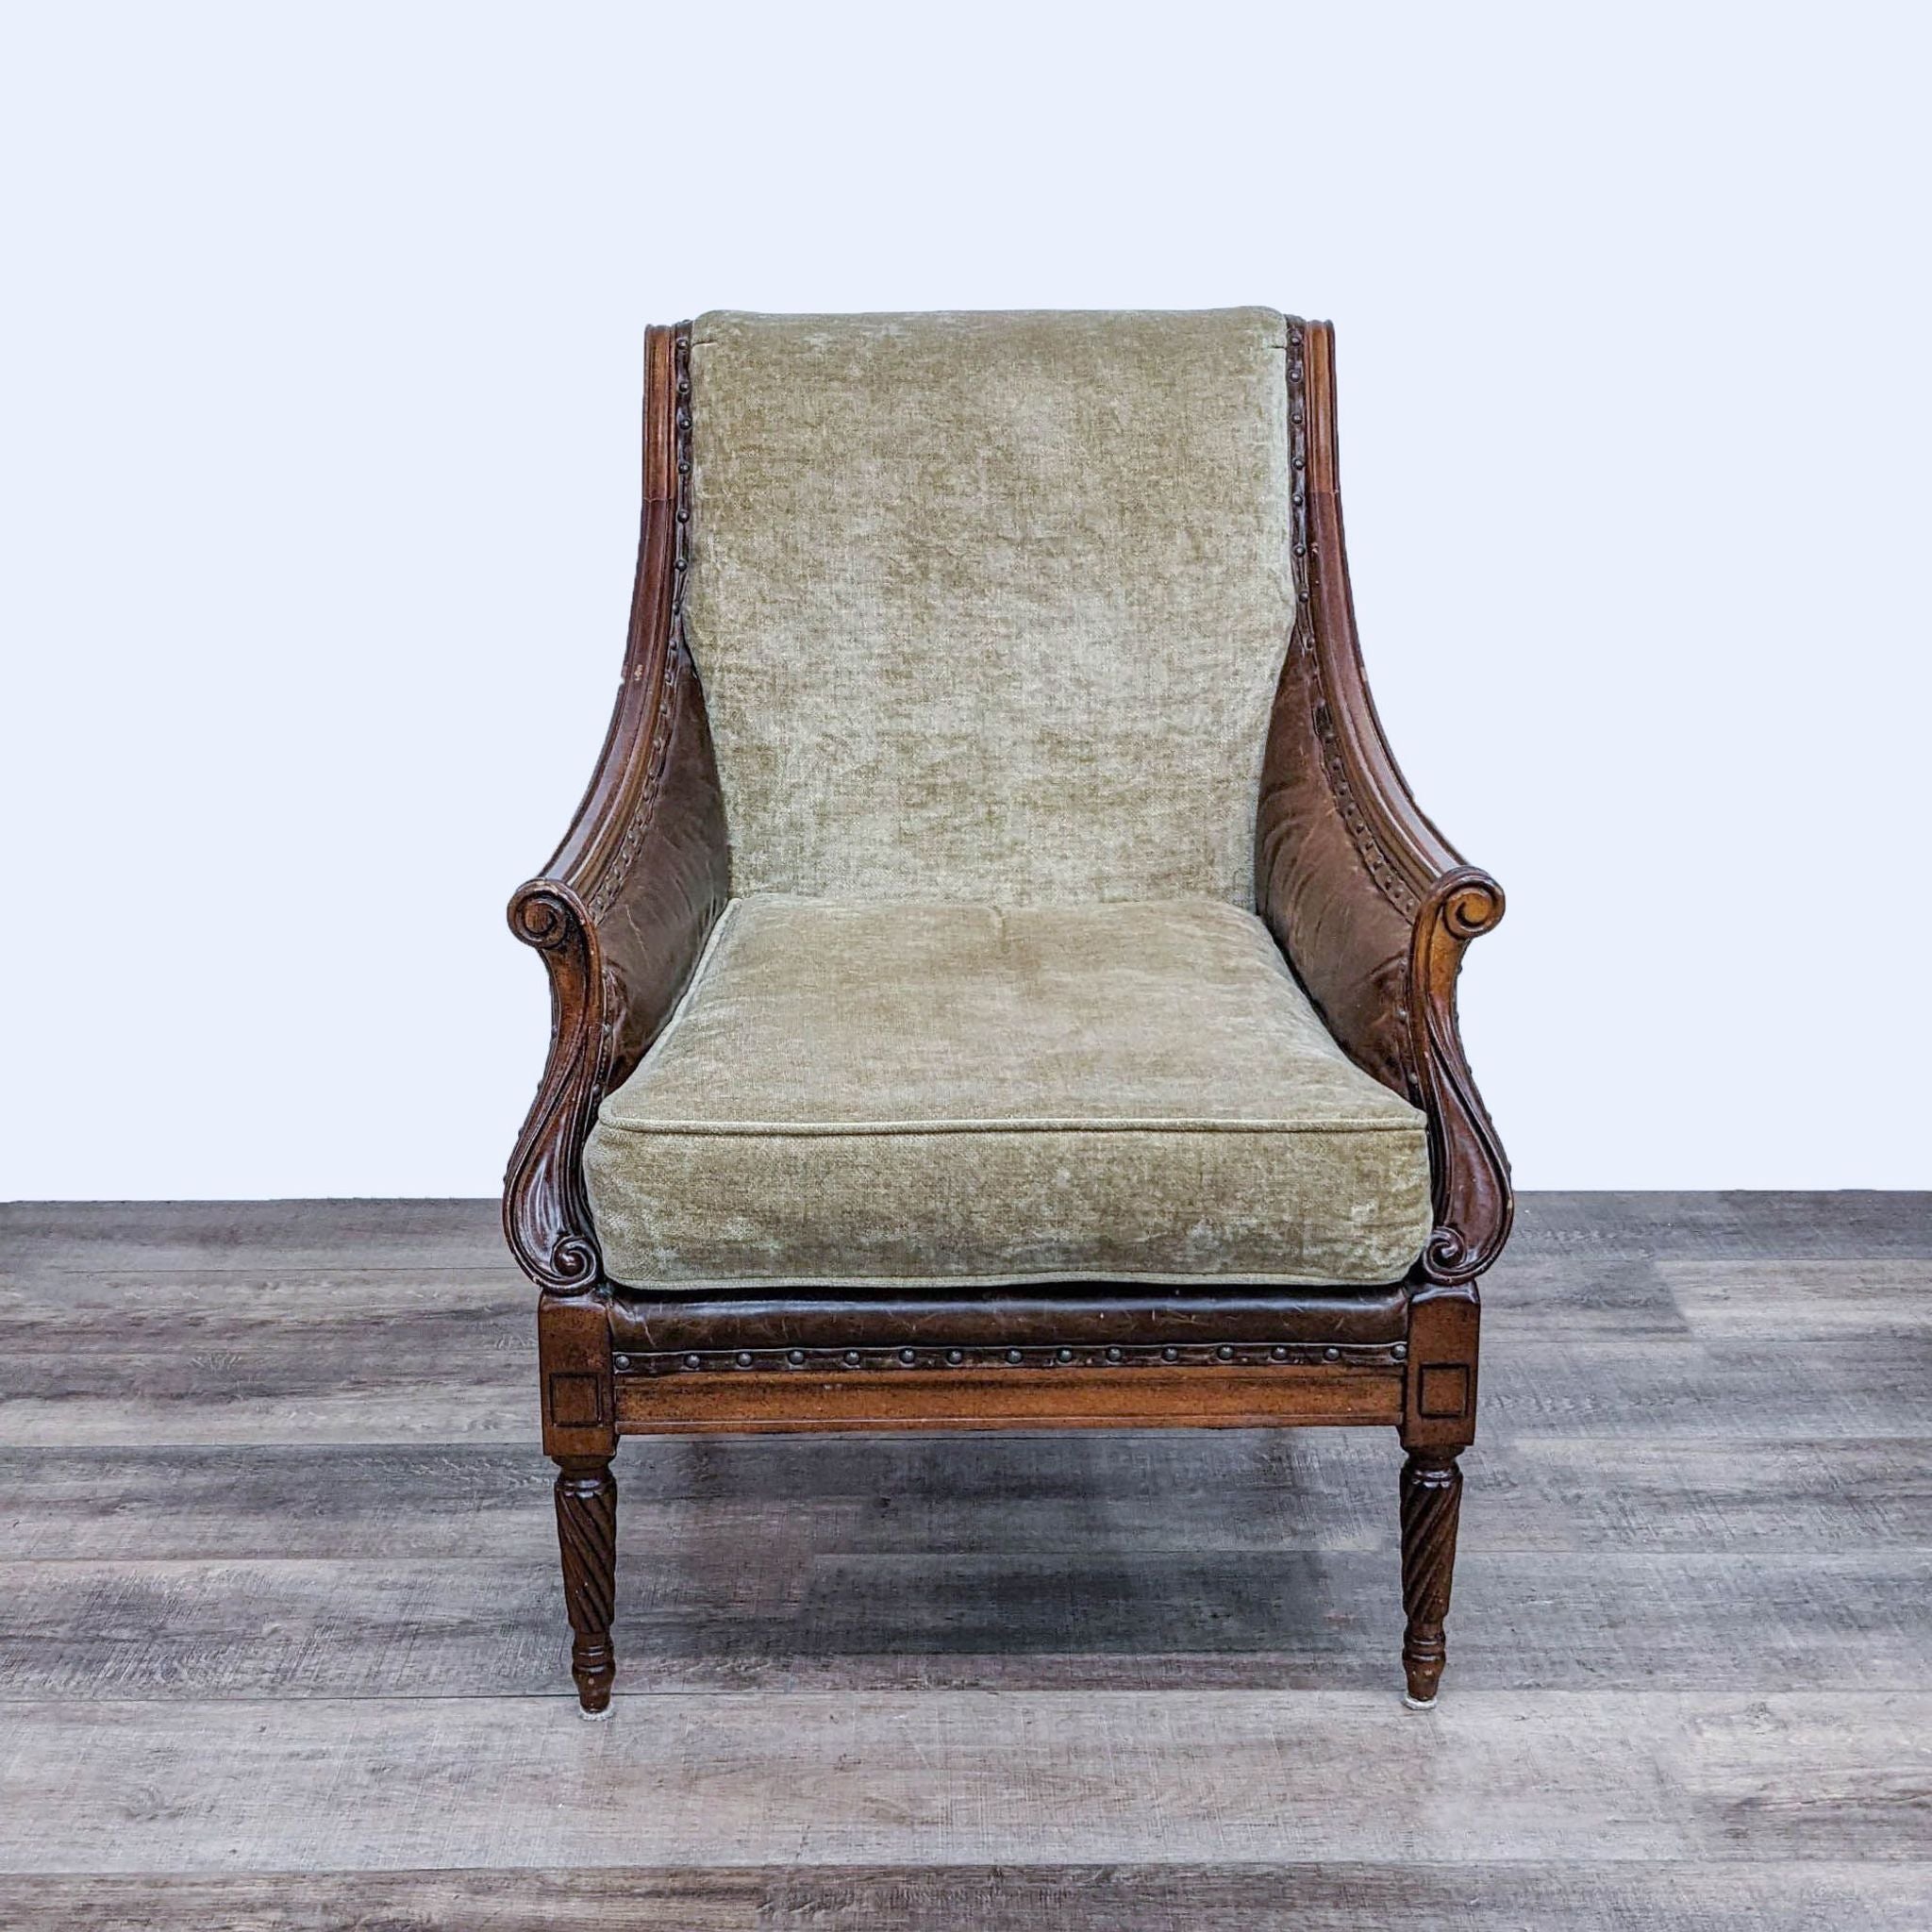 Front view of a Robert Allen armchair with rolled arms, textured fabric, leather trim, and walnut wood frame.